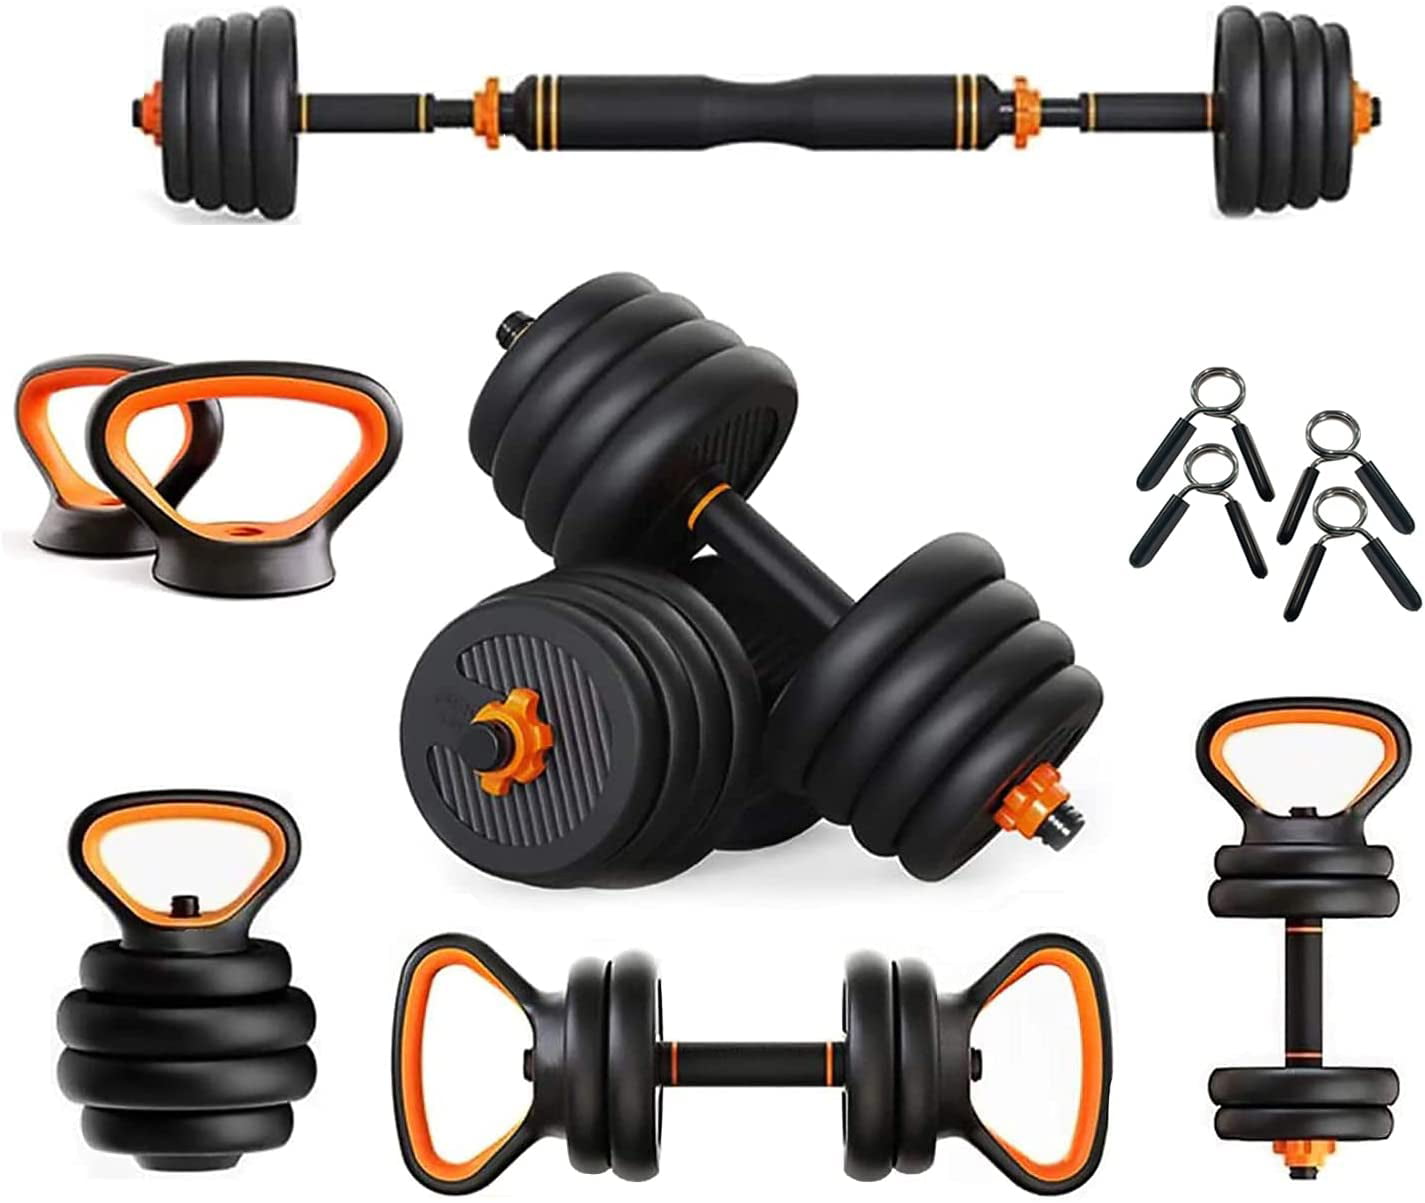 Cyber Monday Totall 22-88LB Weight Dumbbell Set Cap Gym Barbell Plates Body 